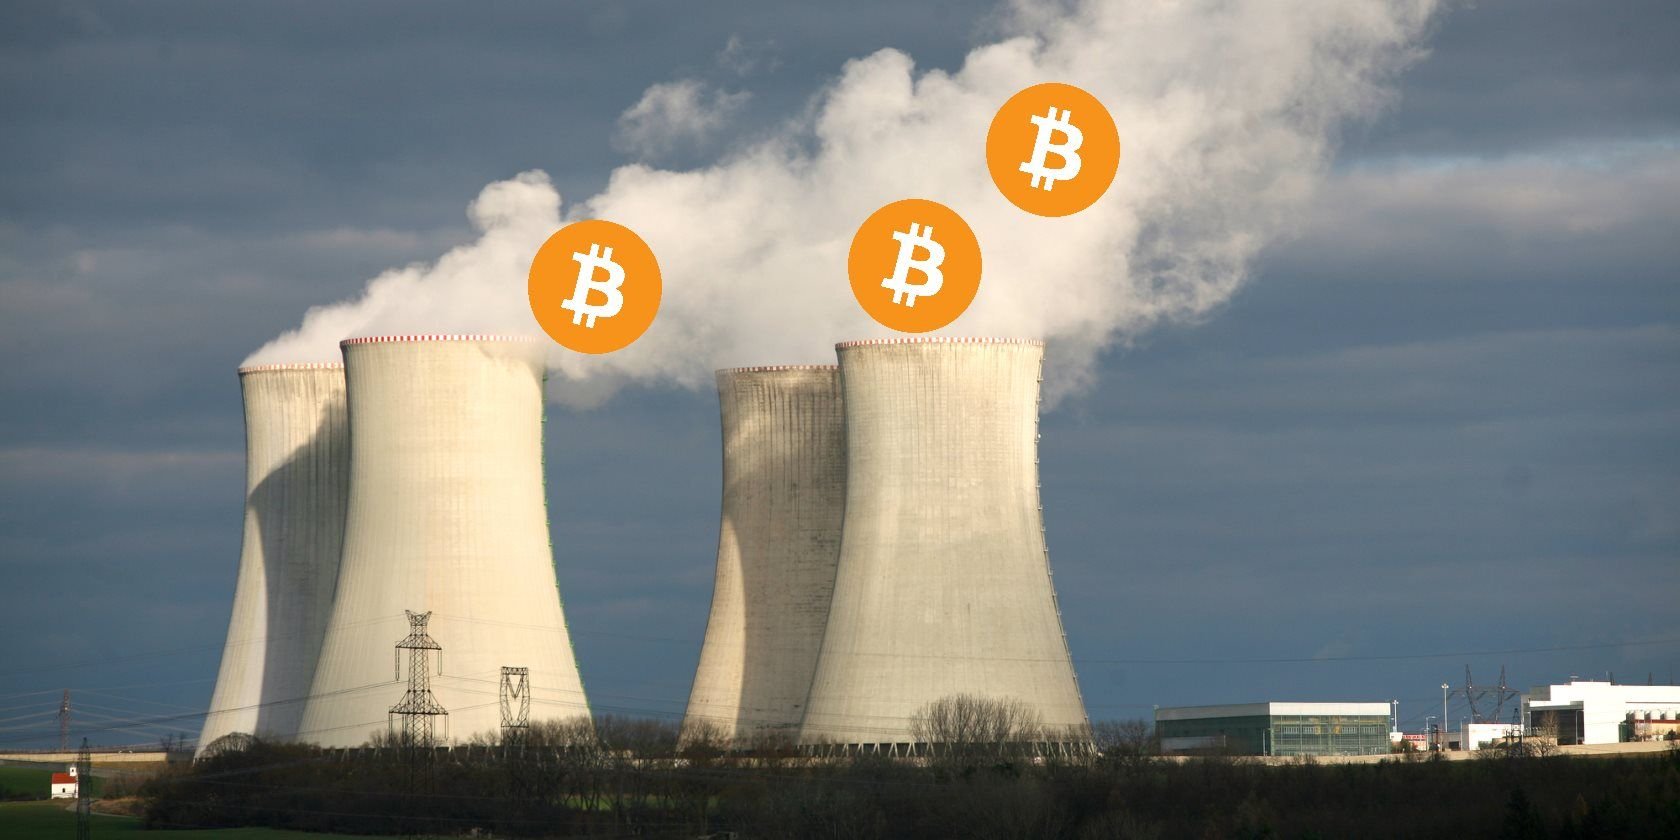 How Bad Is Bitcoin for the Environment? The Impact of Bitcoin Mining